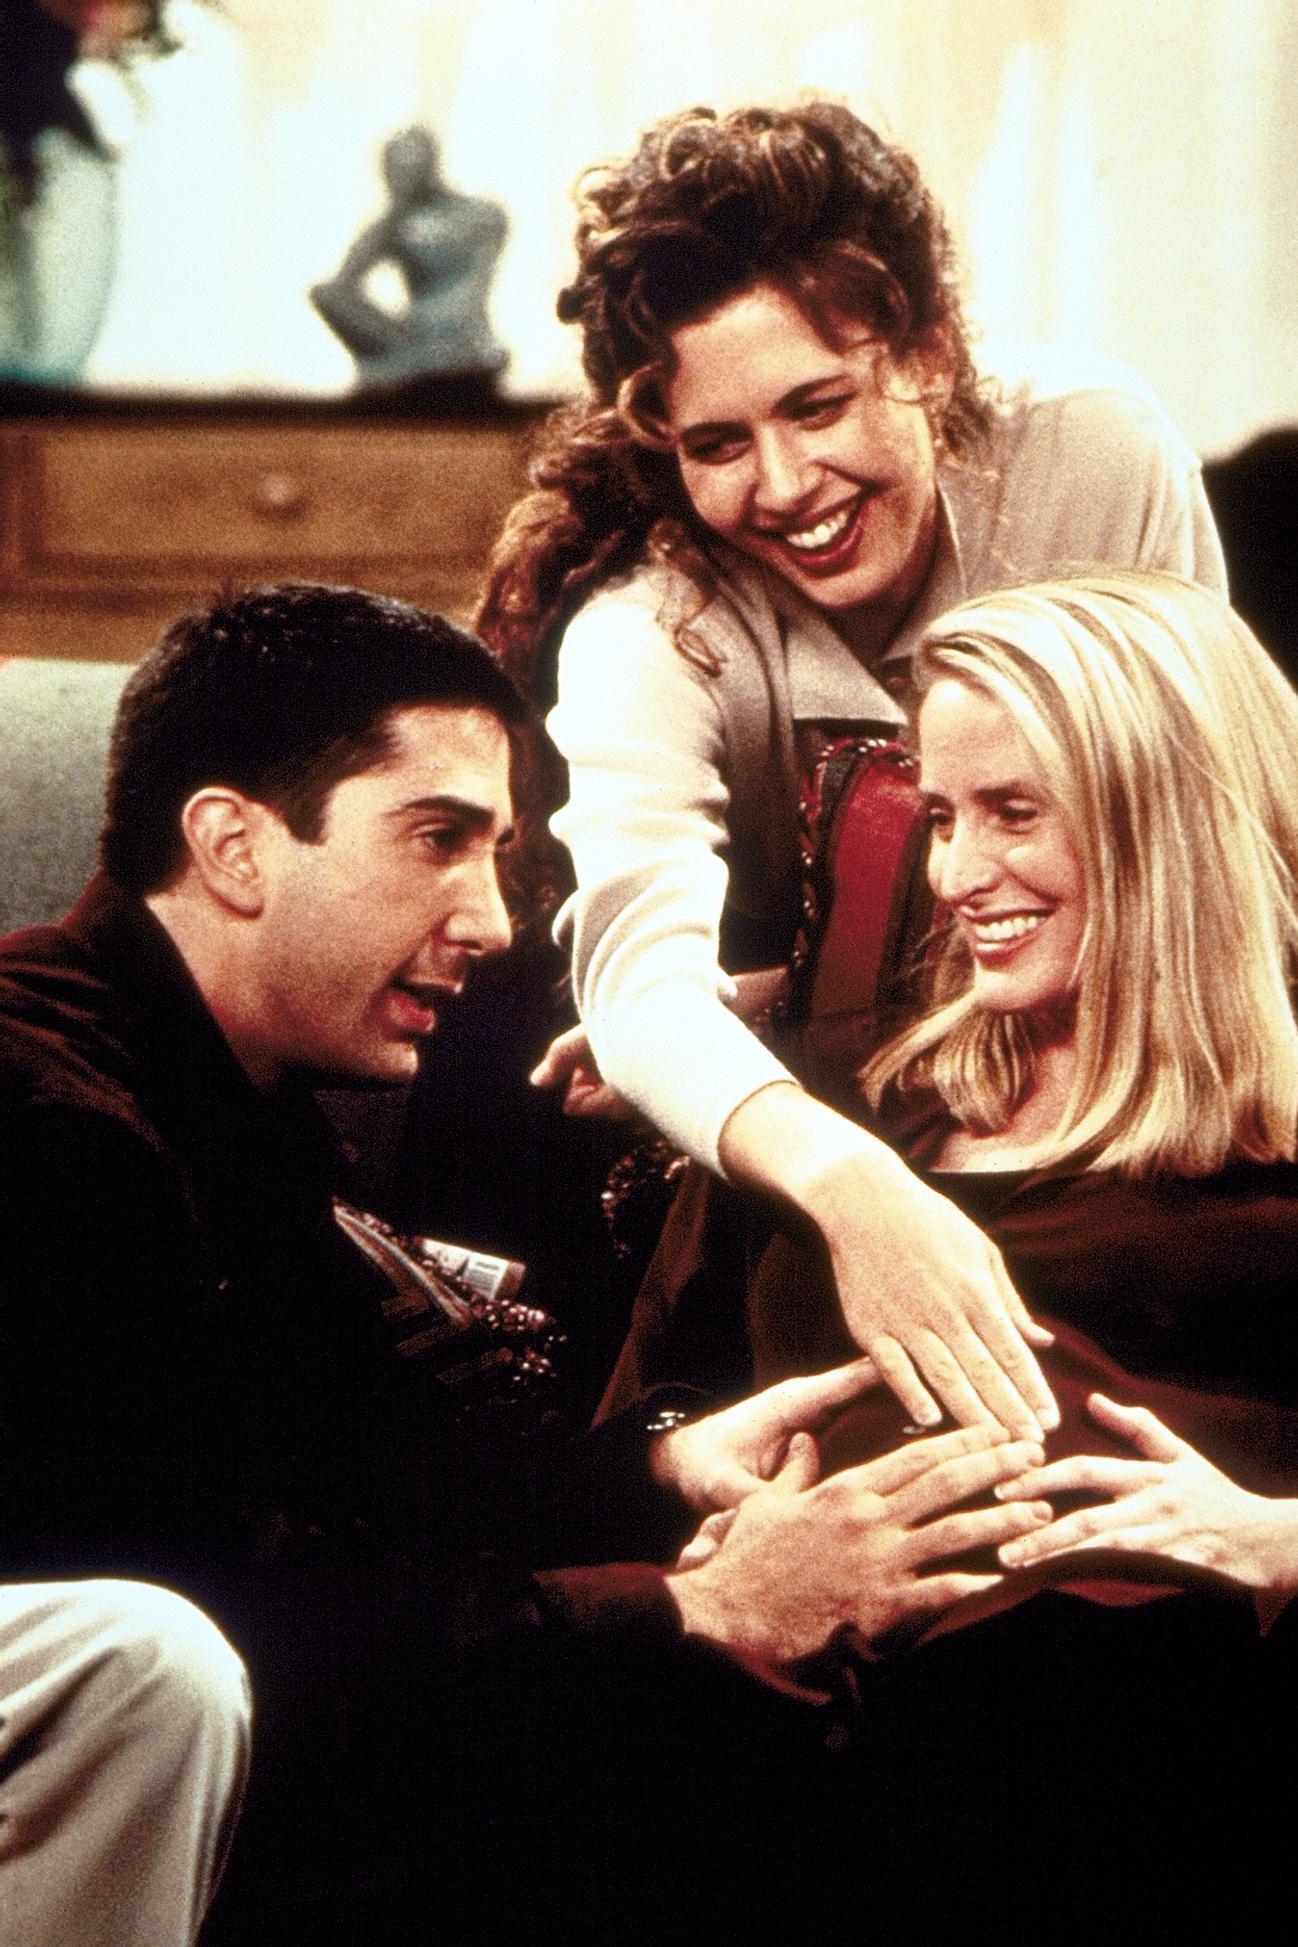 Friends - The One Where Underdog Gets Away